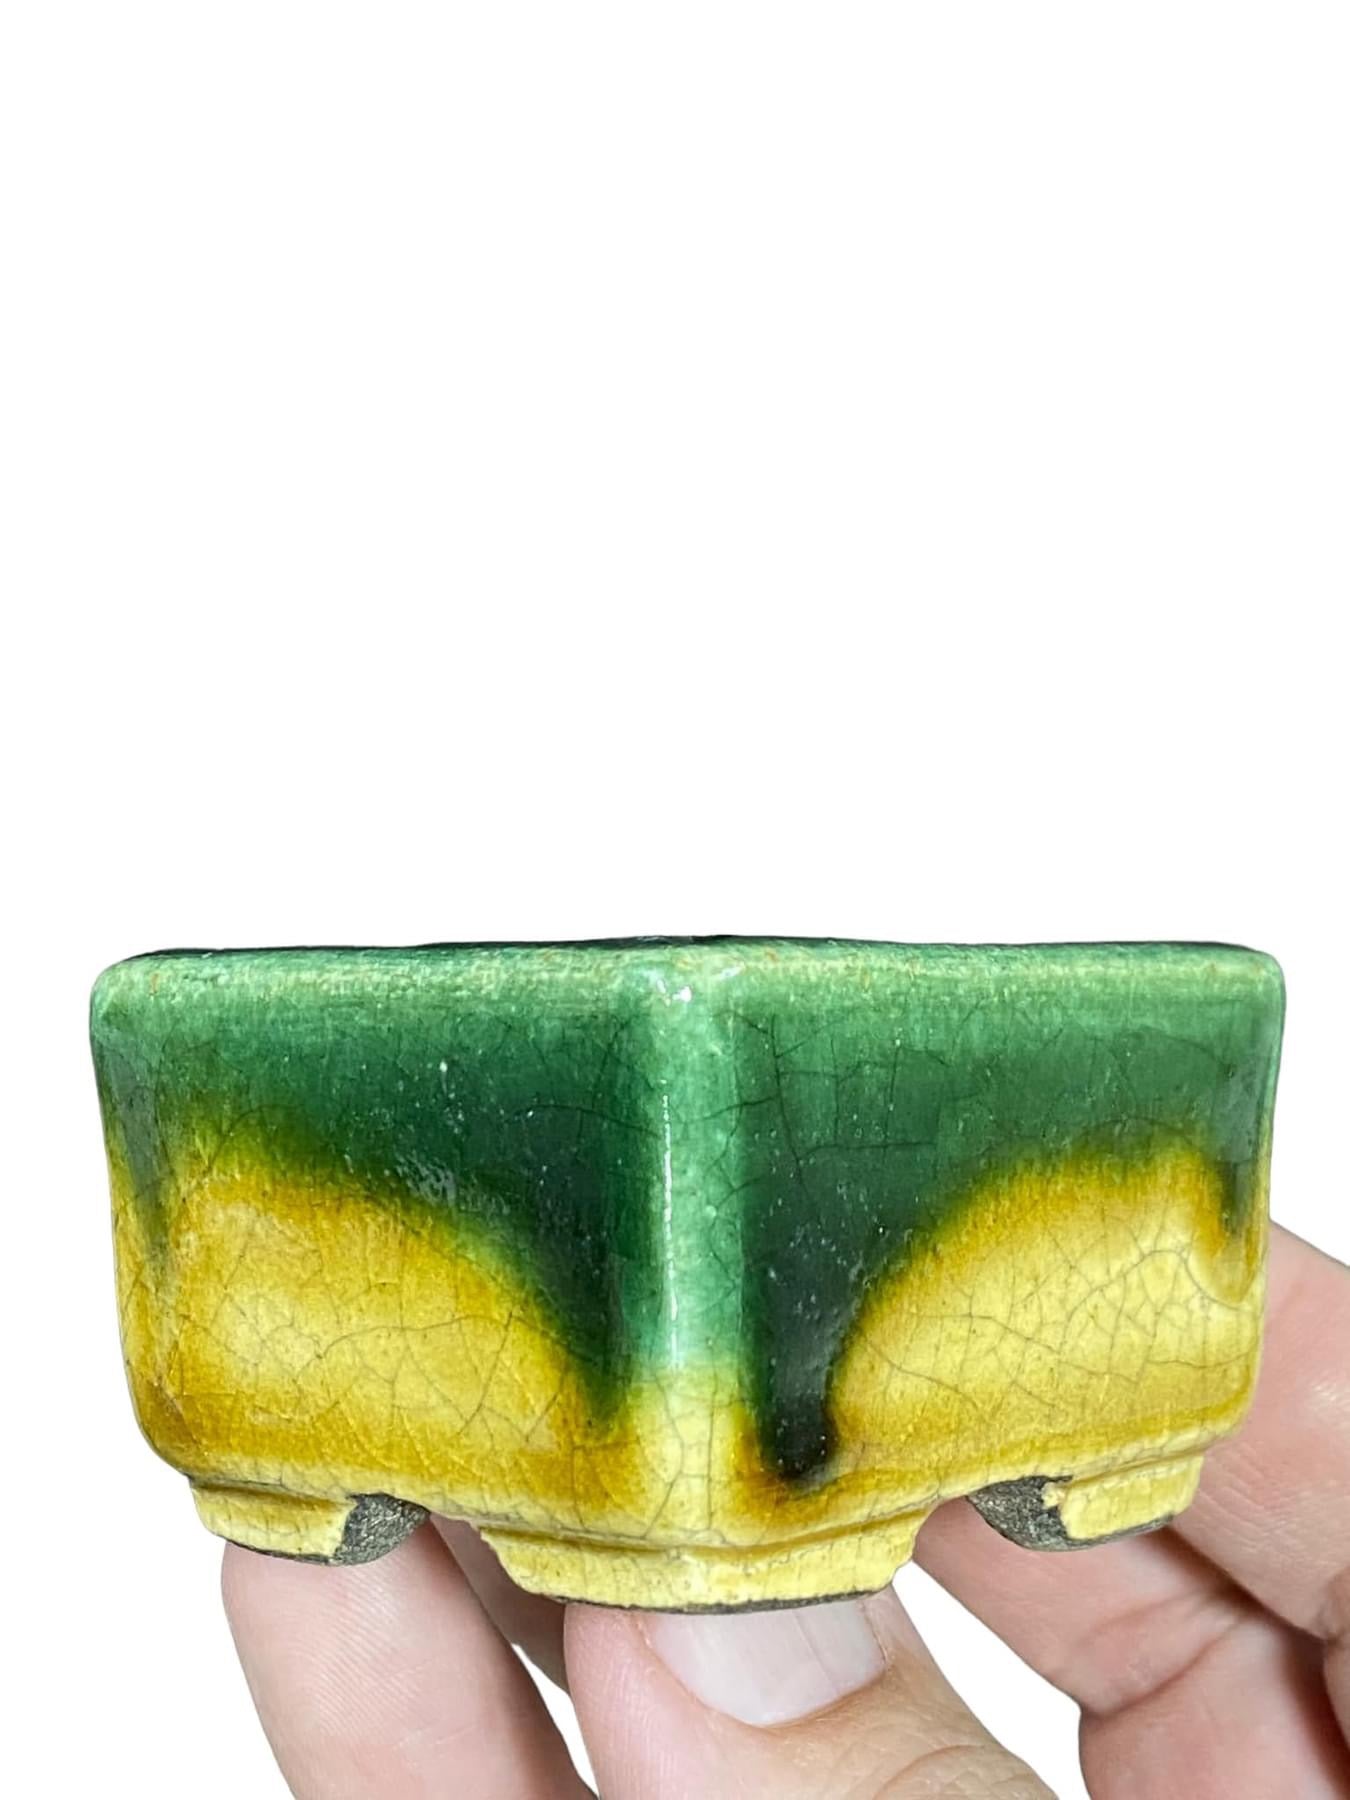 Satomi Terahata - Green and Yellow Glazed Bonsai or Accent Pot (2-5/32” wide)